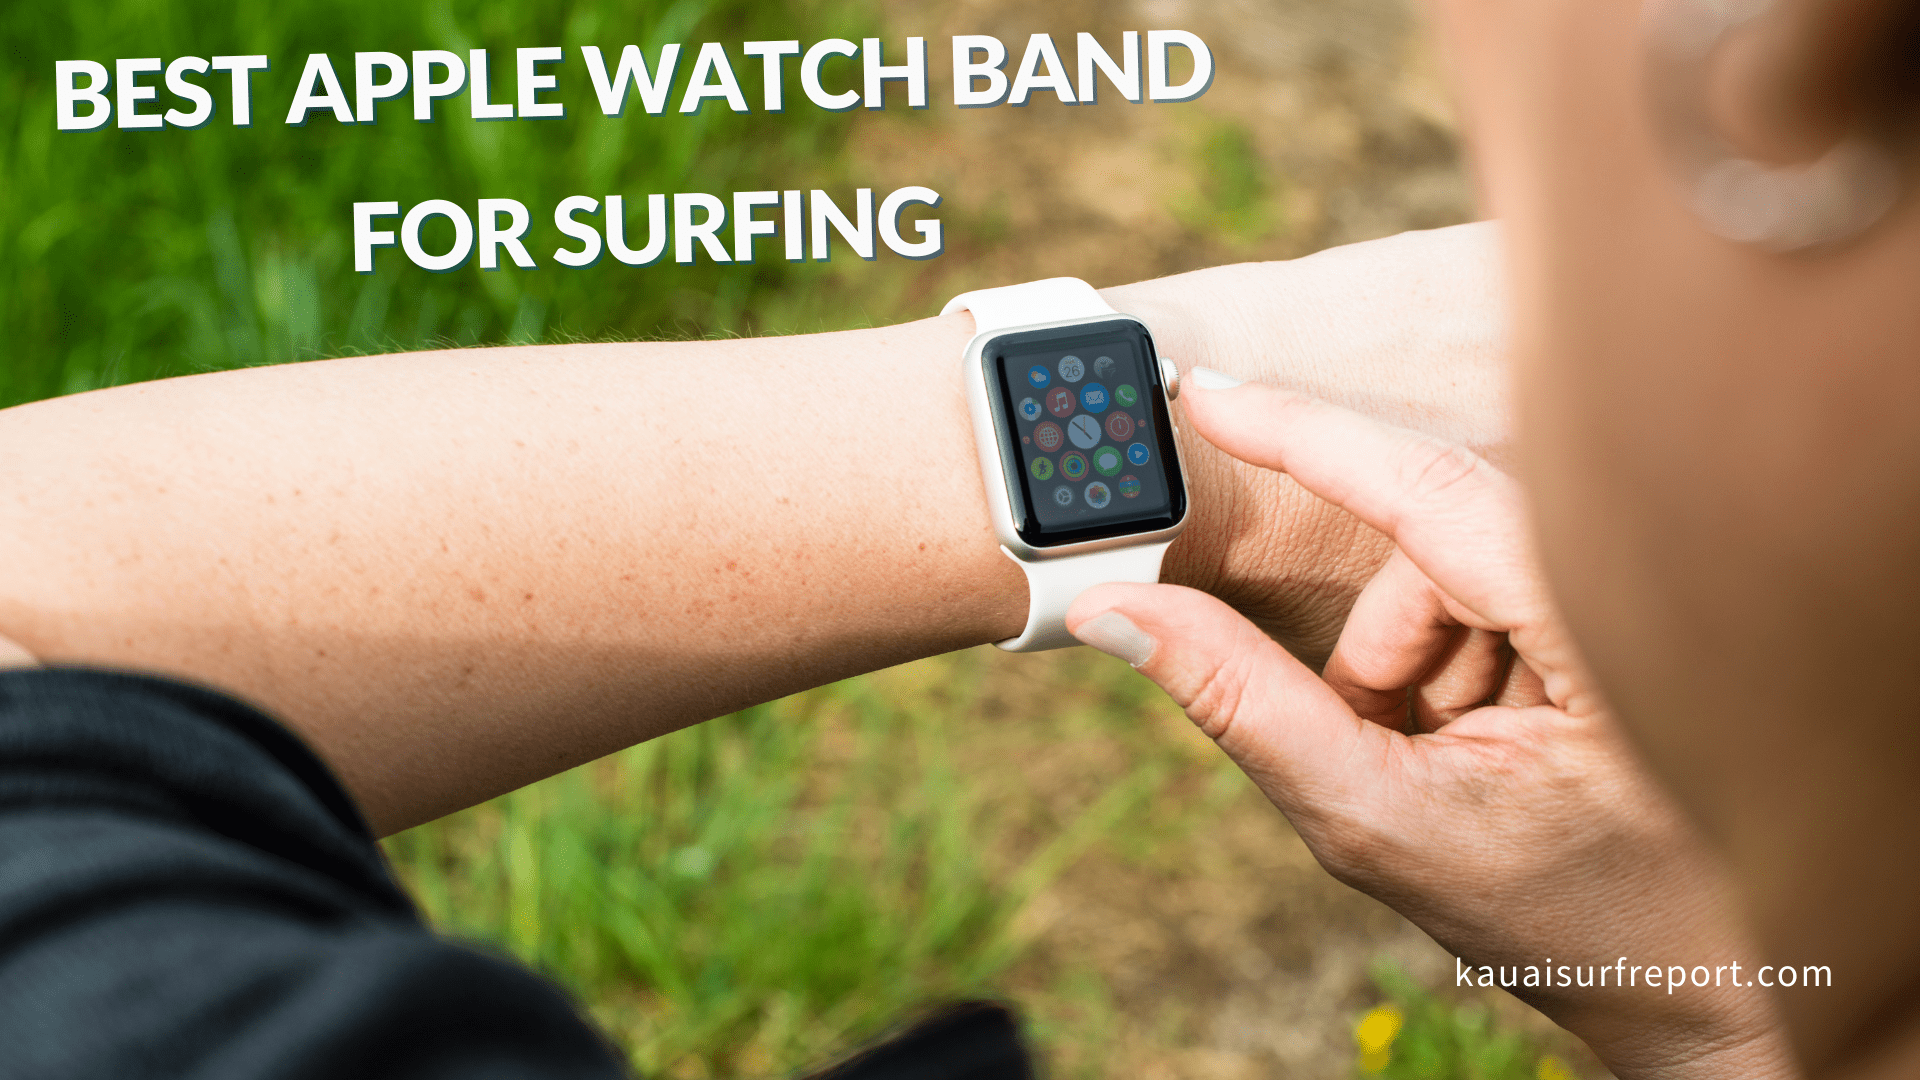 Best Apple Watch band for surfing reviewed | Keep it safe in the surf